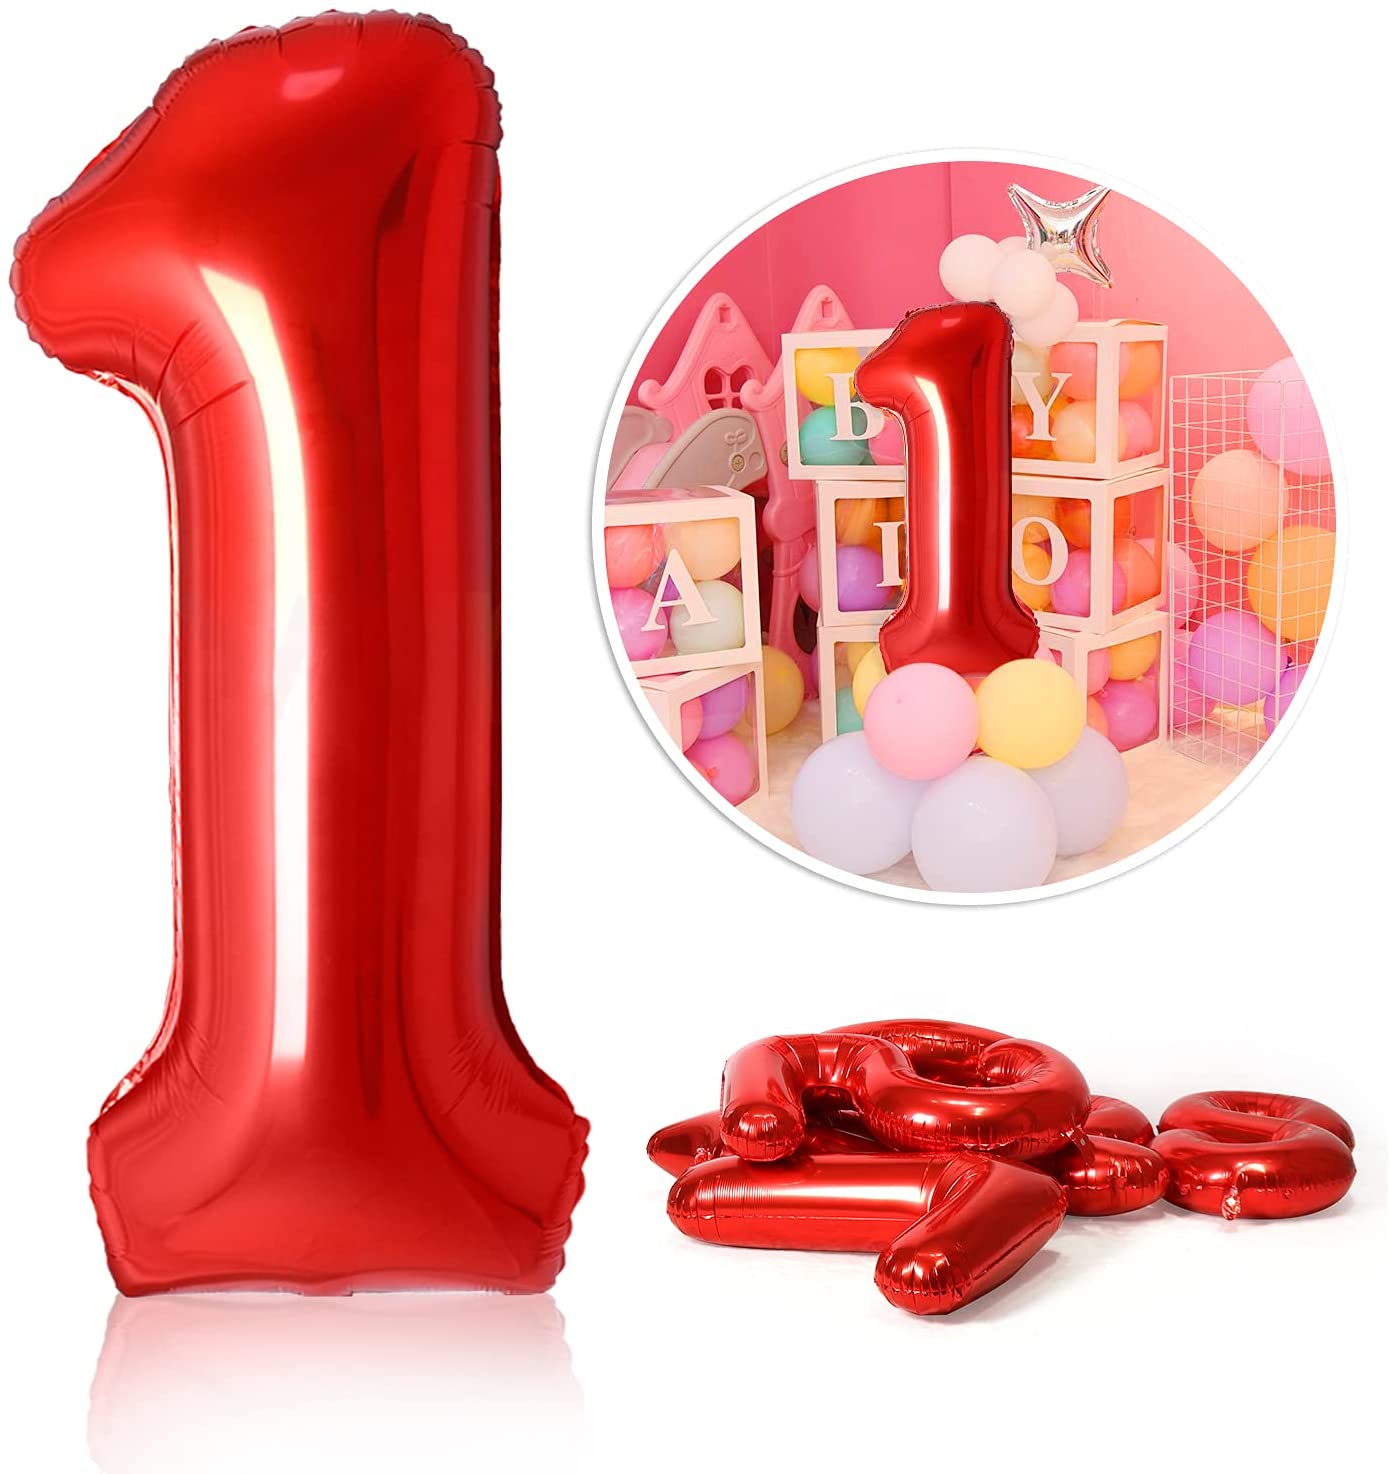 40 Inch Giant Number 9 Mylar Balloons Red Foil Large Number Big Helium Balloon Girls Birthday Party Decoration 